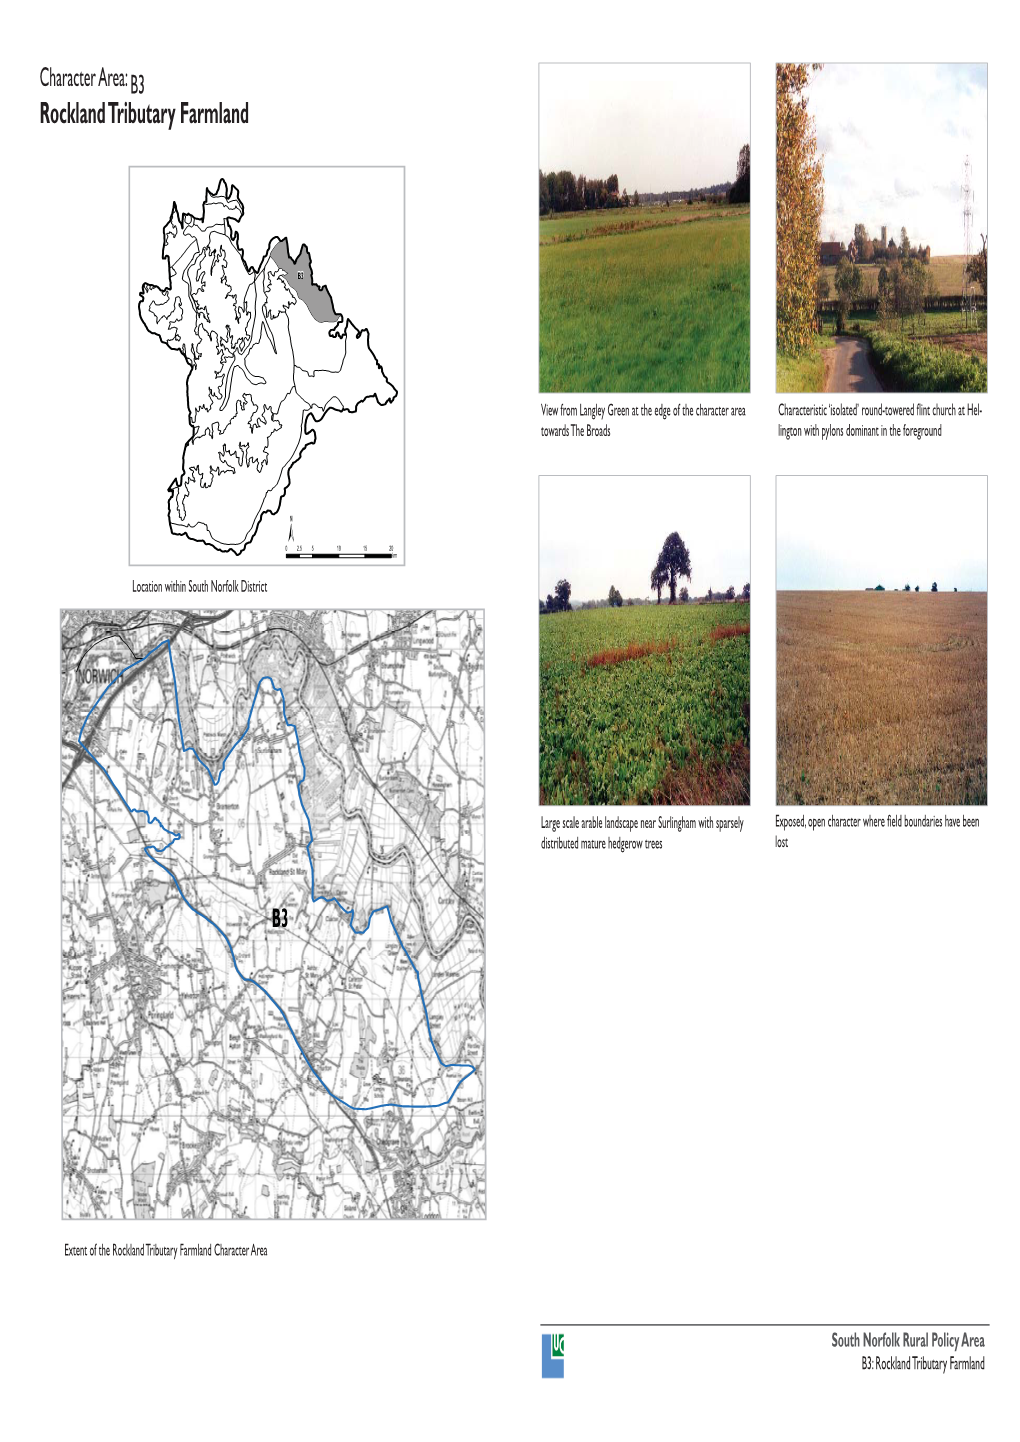 Download: Land Use Consultants 2001 RPA B3 Rockland Tributary